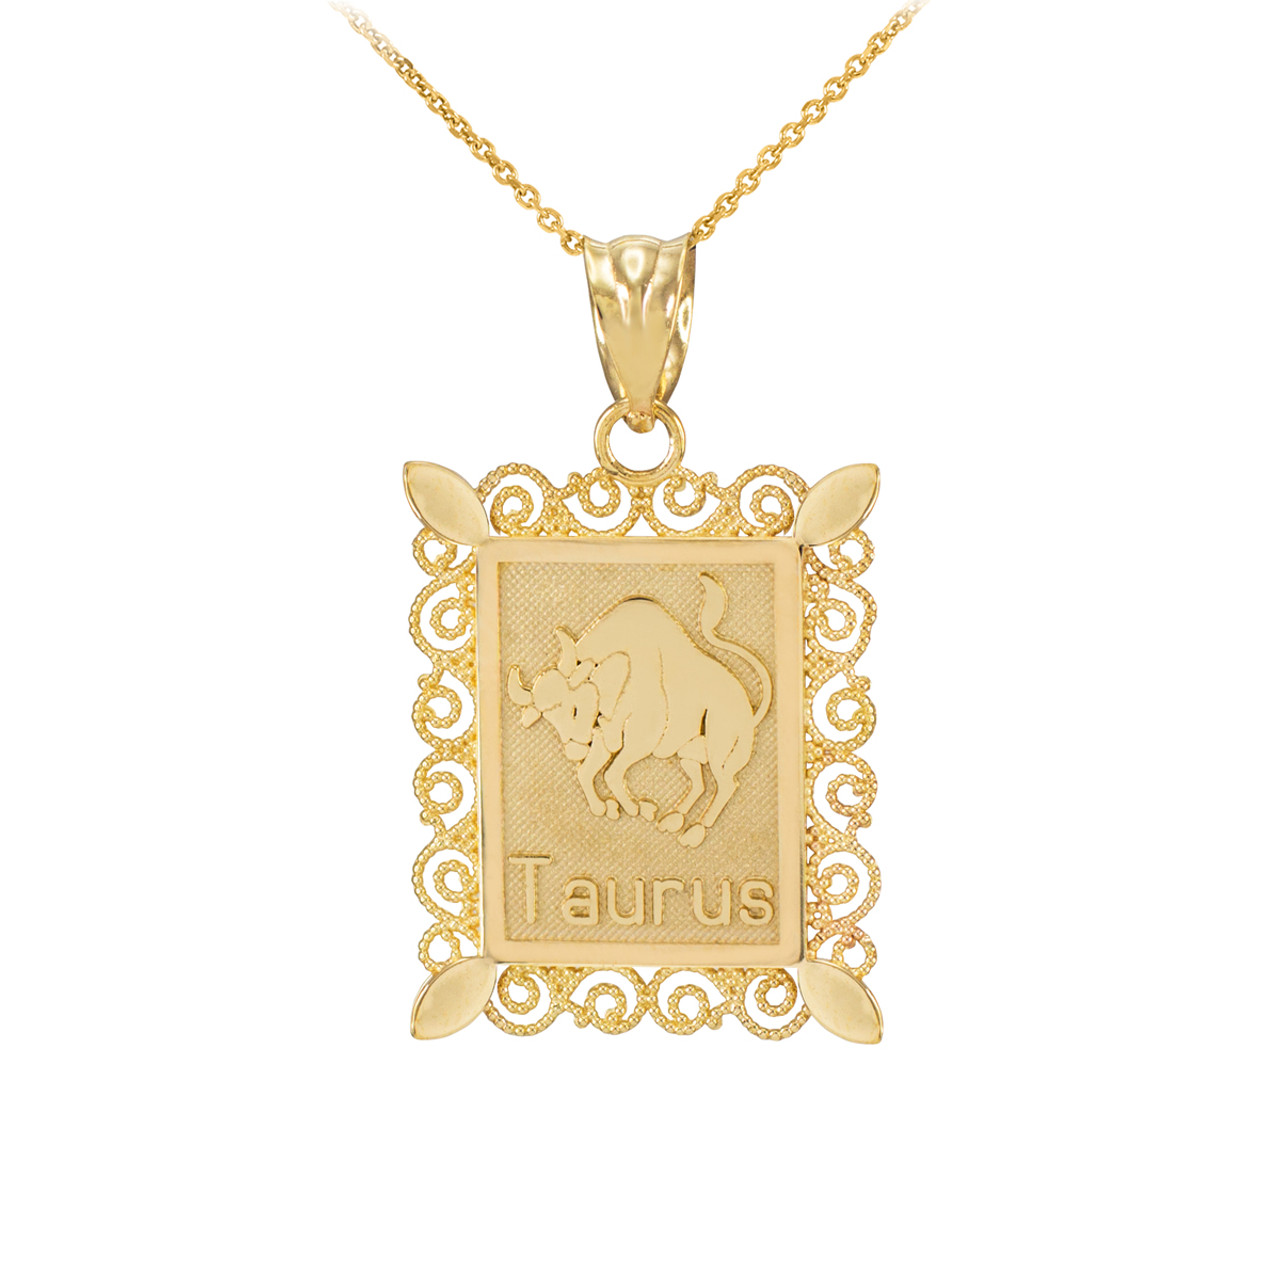 18kt Gold Plated Astrology Necklace with Zodiac Pendant of Taurus -  MusicBoxAttic.com